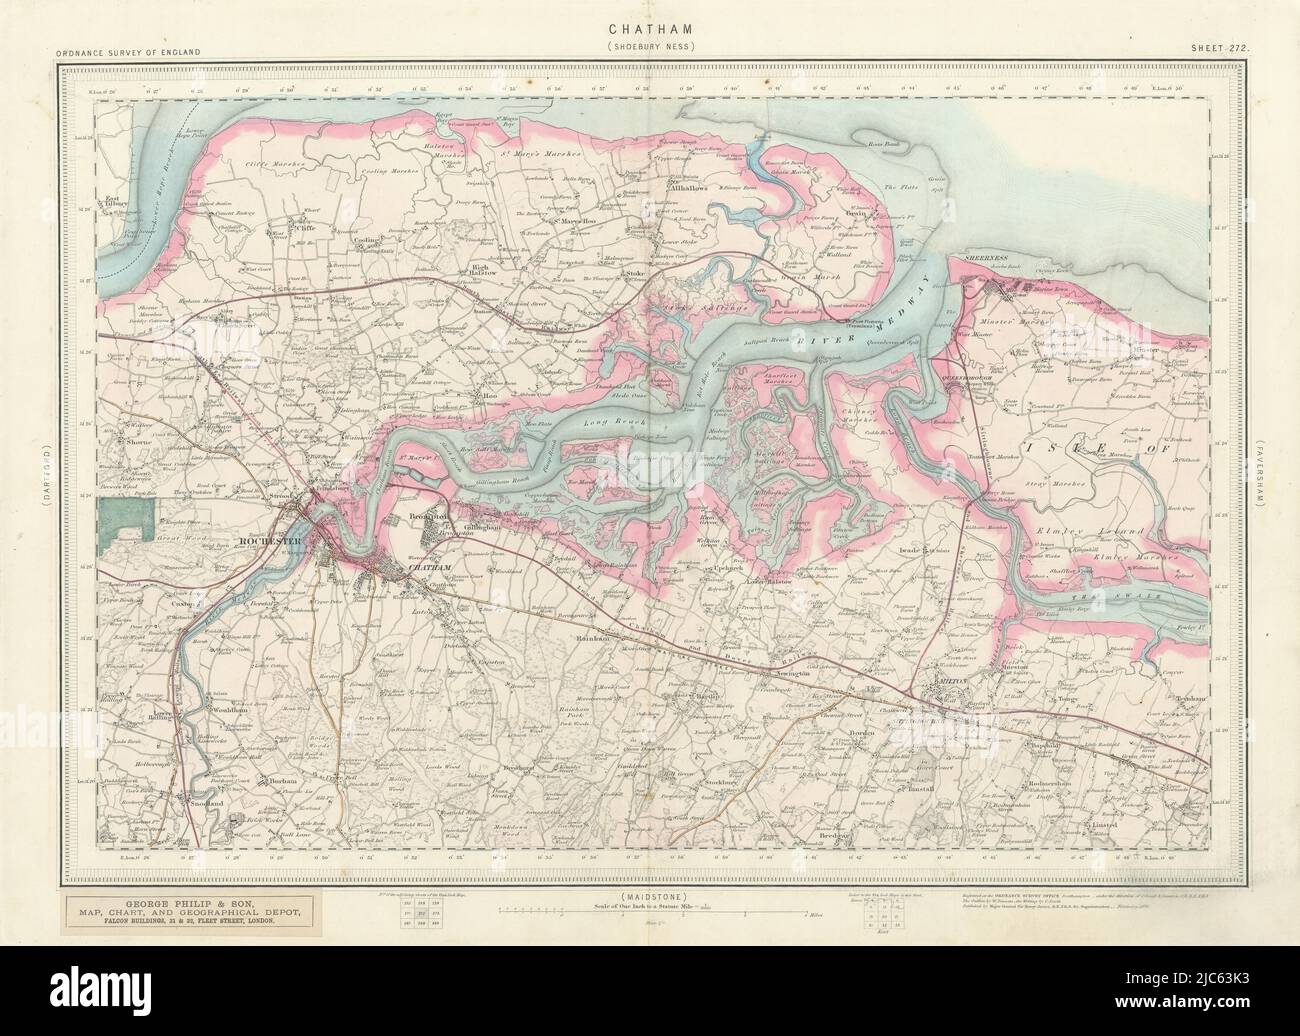 Old Ordnance Survey Map The Medway Towns 1893 England Sheet 272 